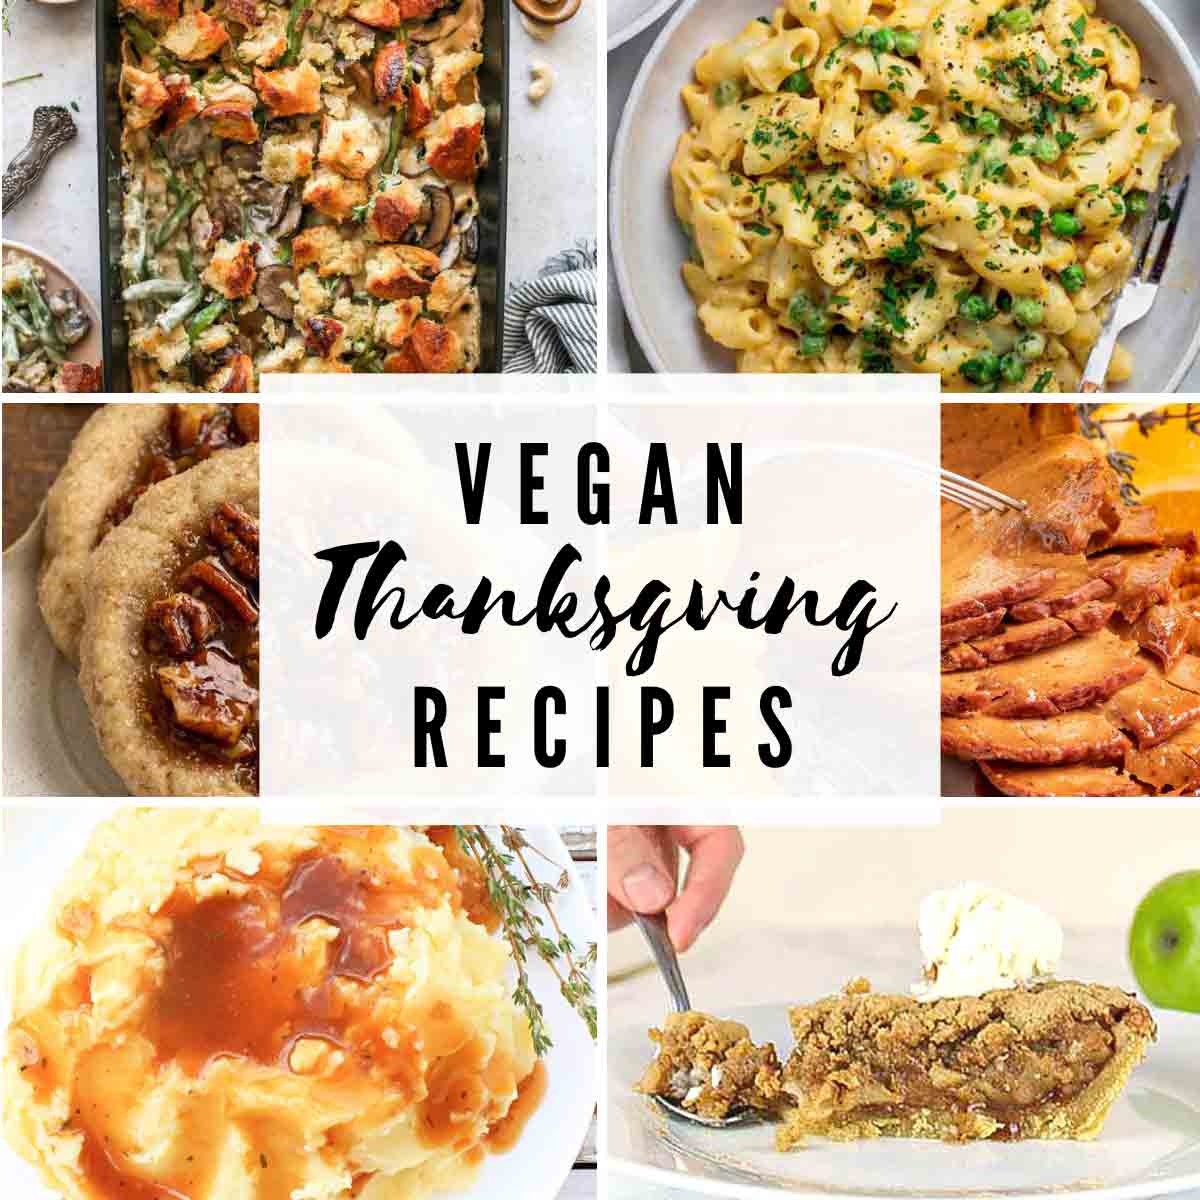 6 Vegan Thanksgiving Dishes With Text Overlay That Reads 'vegan Thanksgiving Recipes'